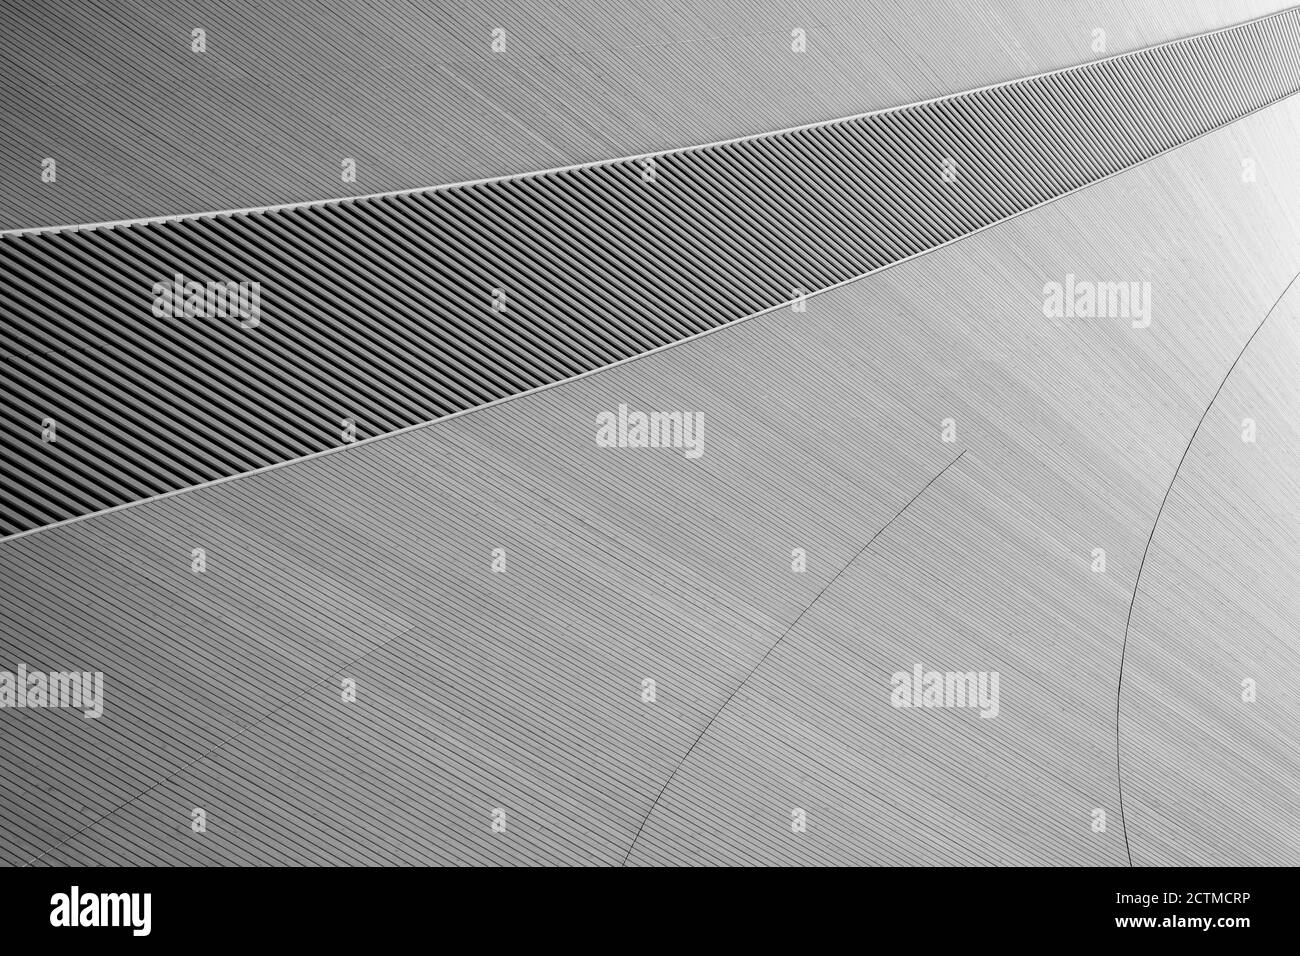 Abstract and modern ceiling made of spruce tree's wood boards in black and white. Viewed from below. High resolution full frame textured background. Stock Photo